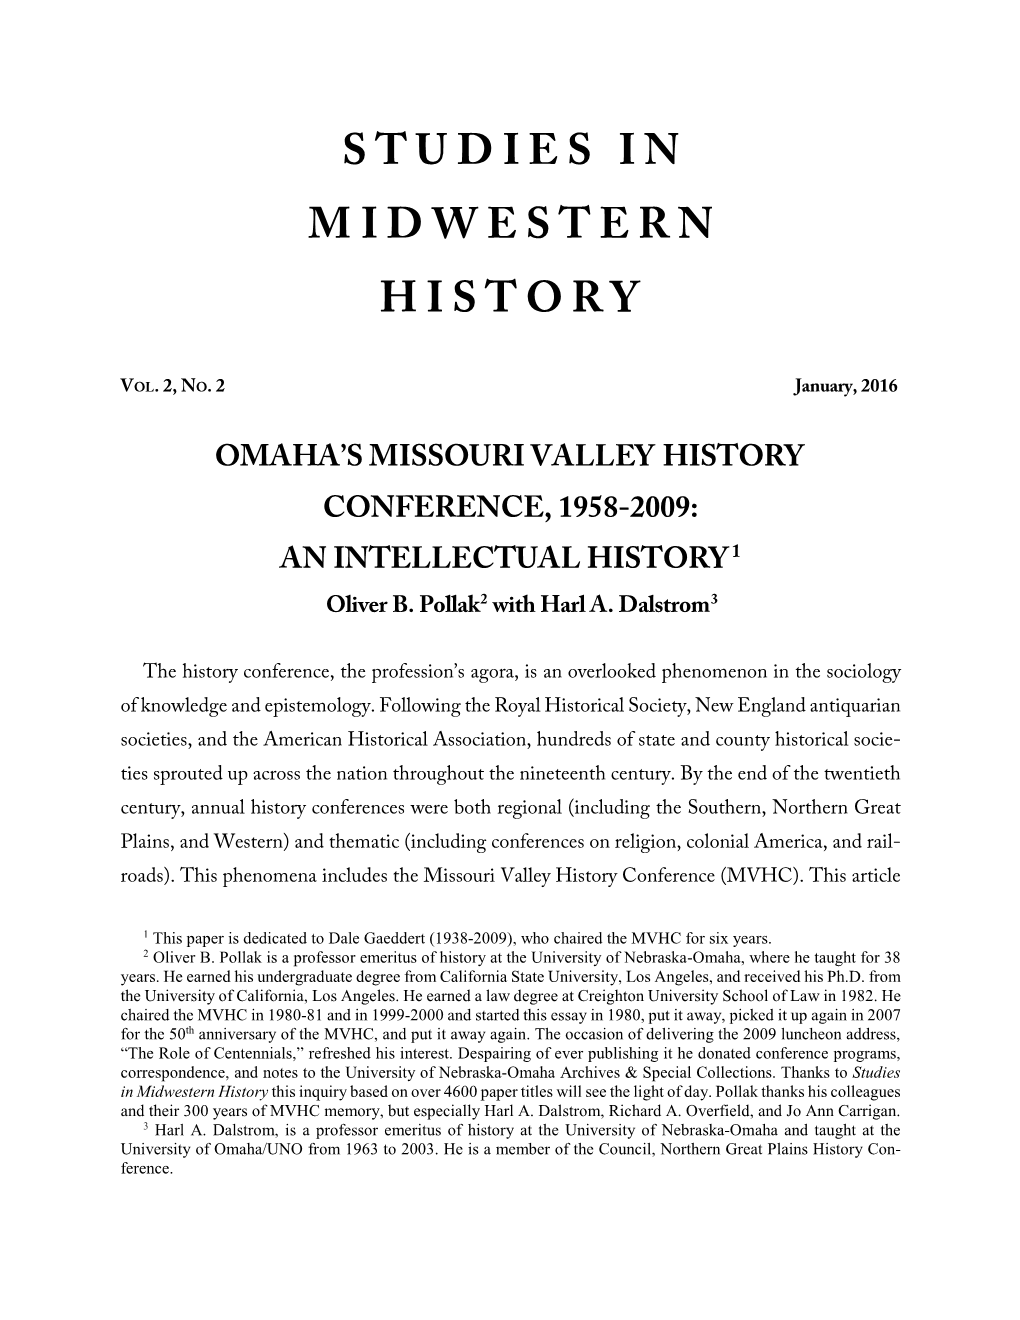 Omaha's Missouri Valley History Conference, 1958-2009: An